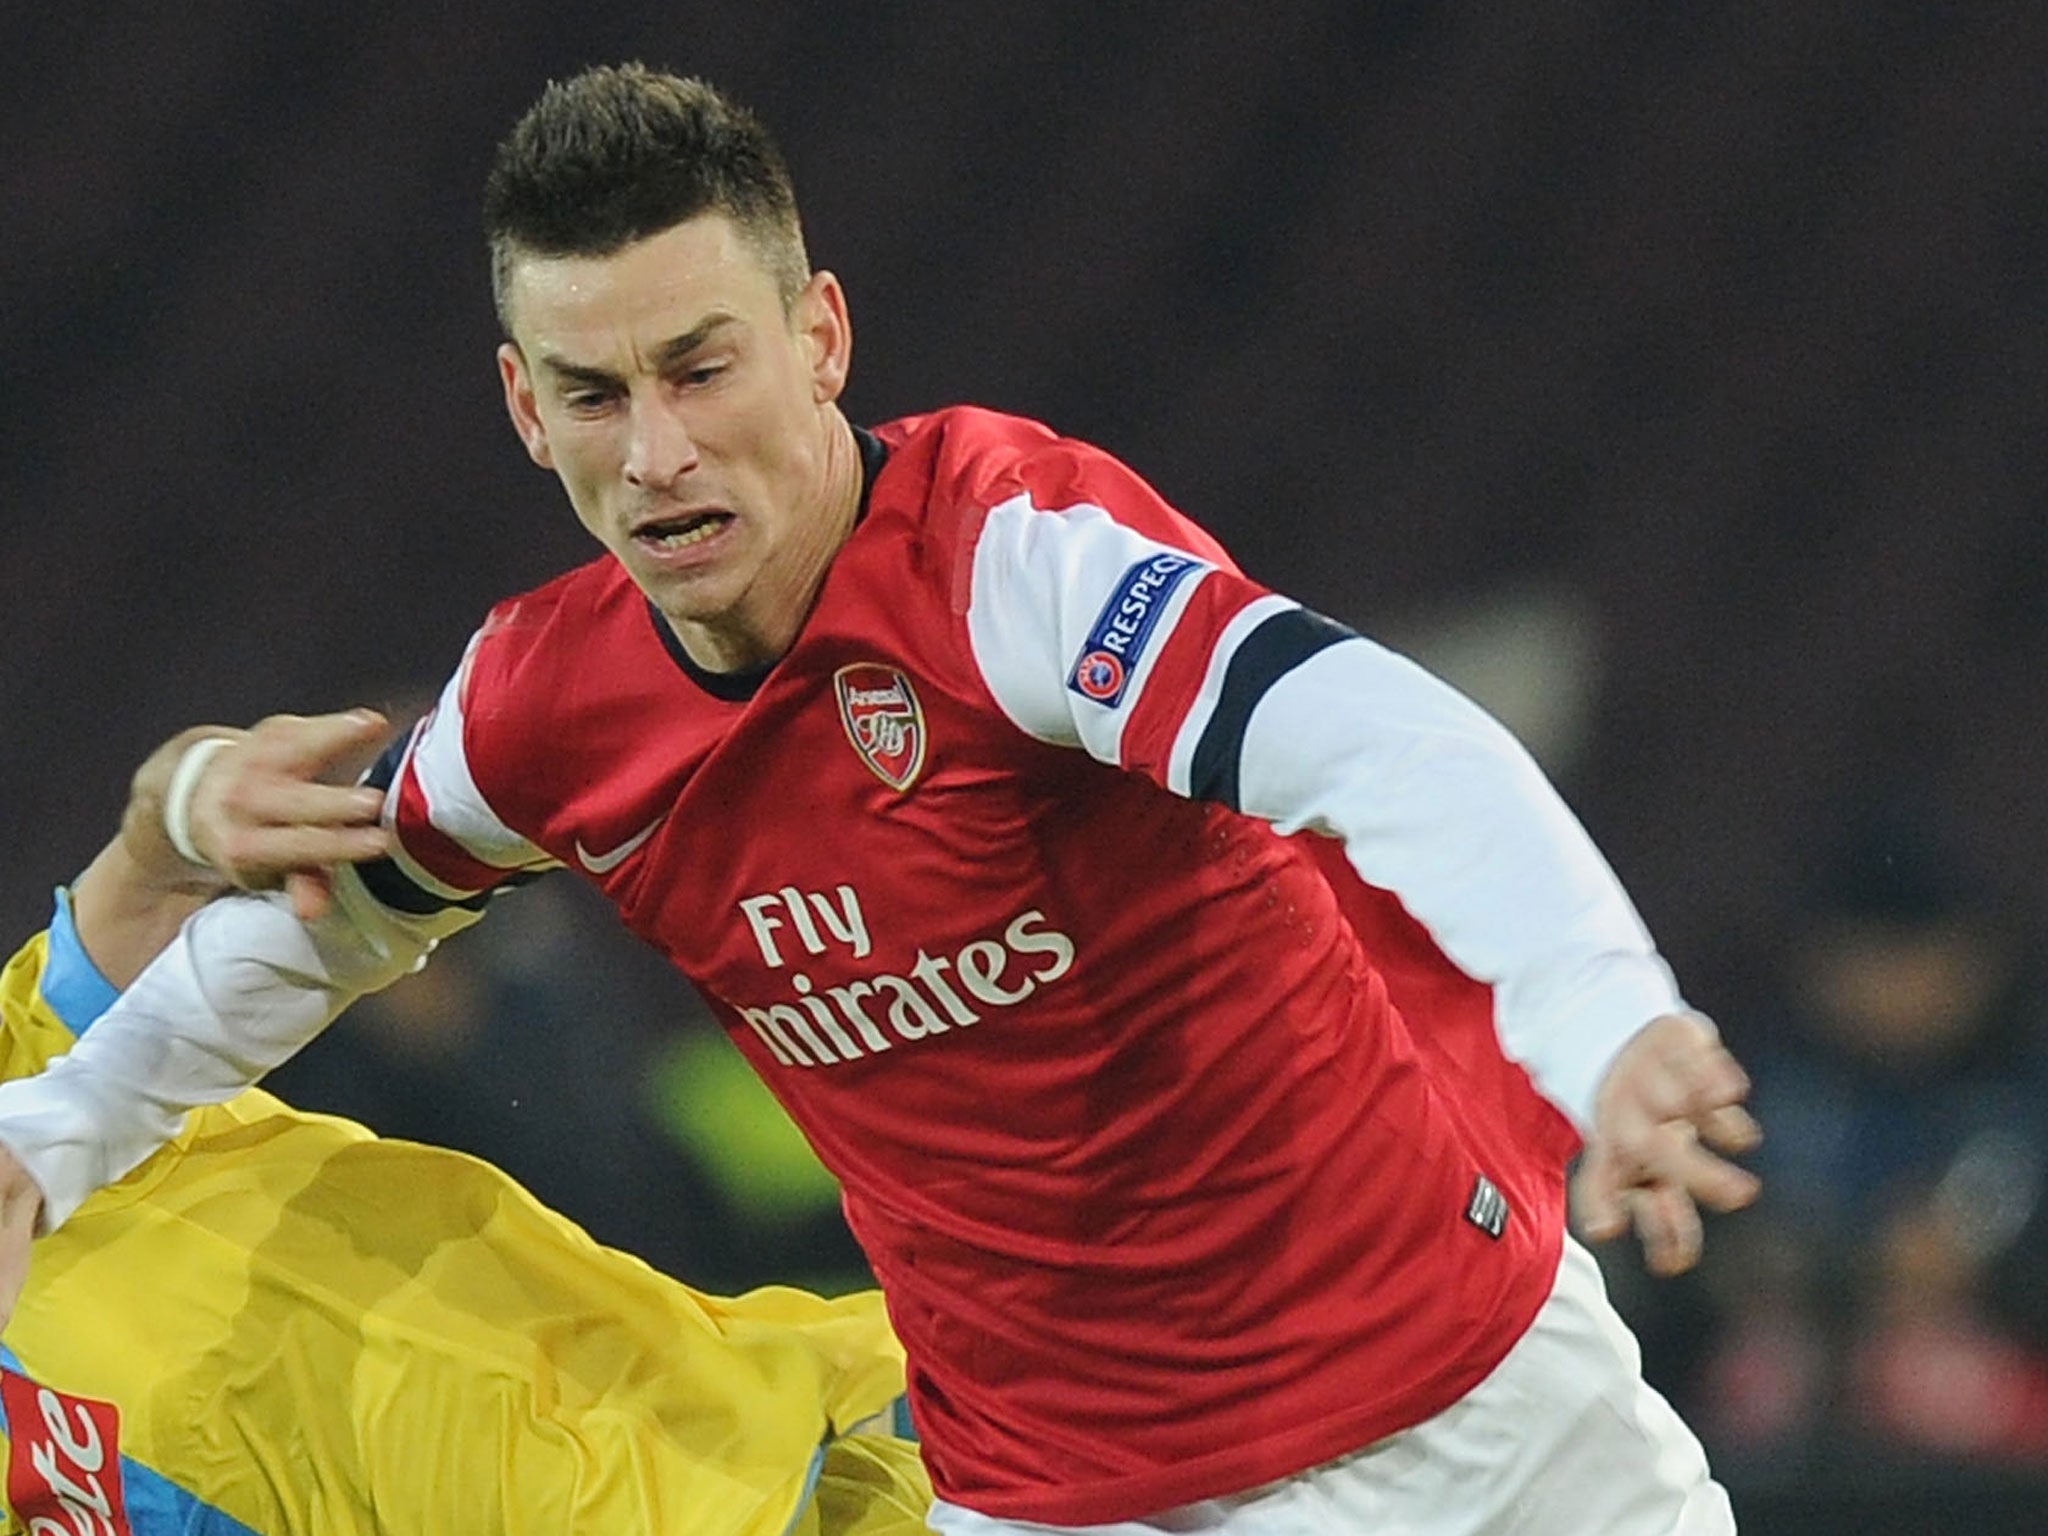 Laurent Koscielny has attracted the interest of PSG, Monaco and Bayern Munich